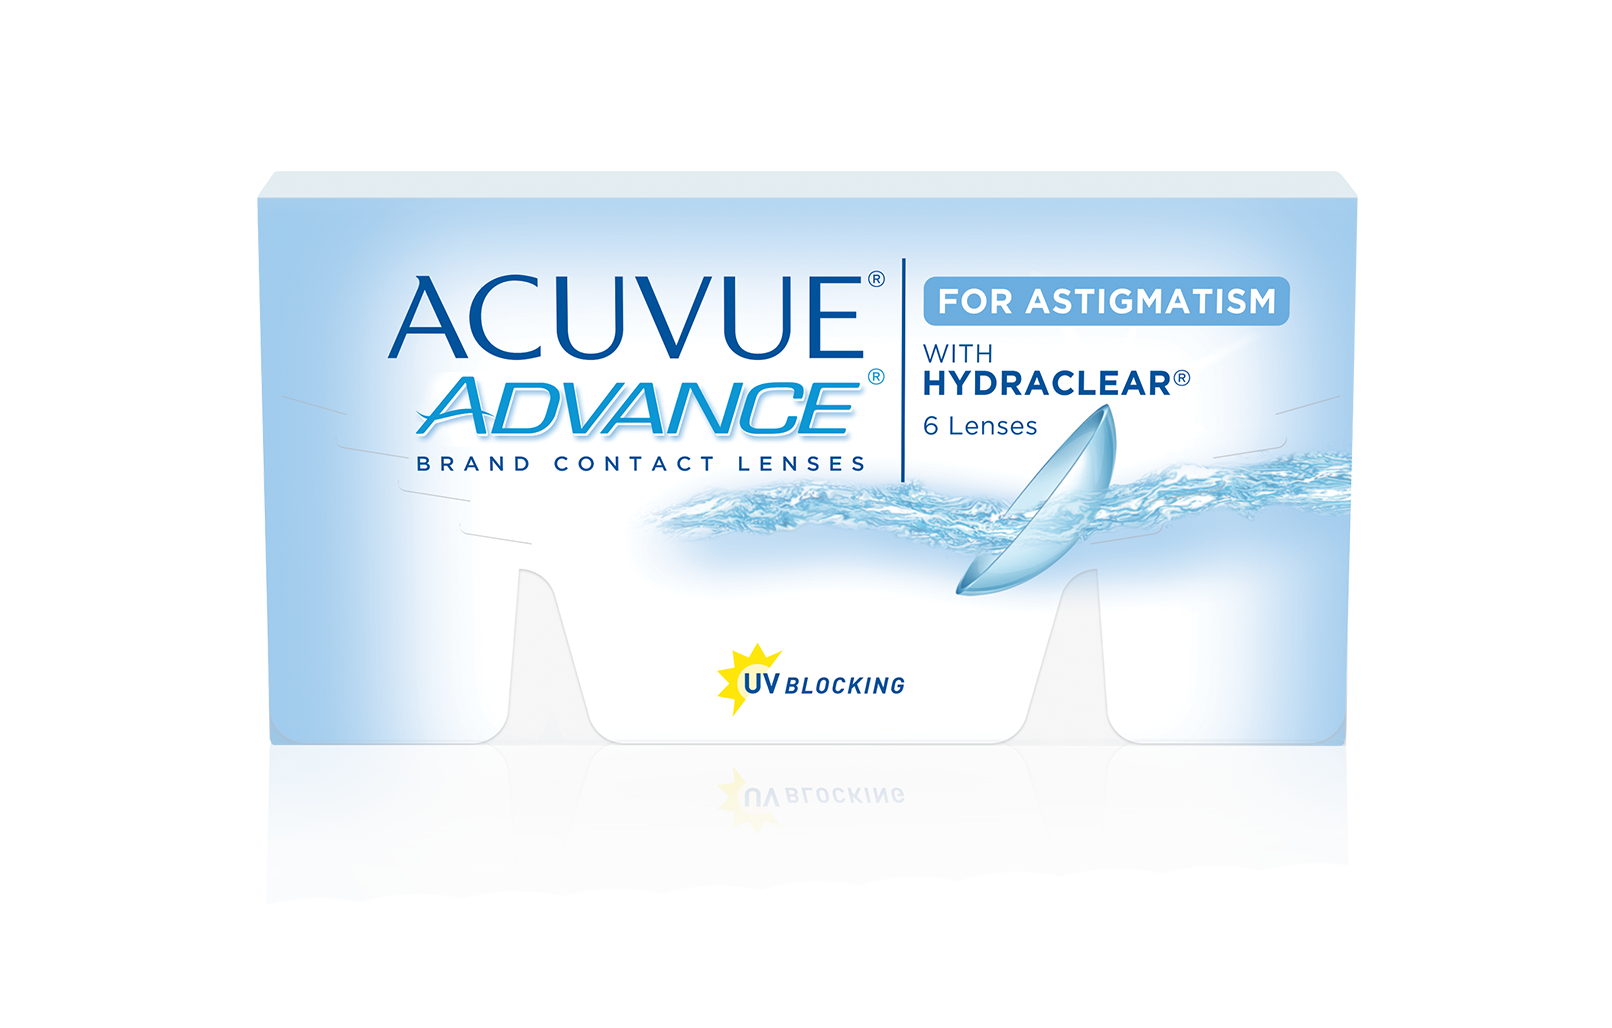 ACUVUE® ADVANCE For Astigmatism